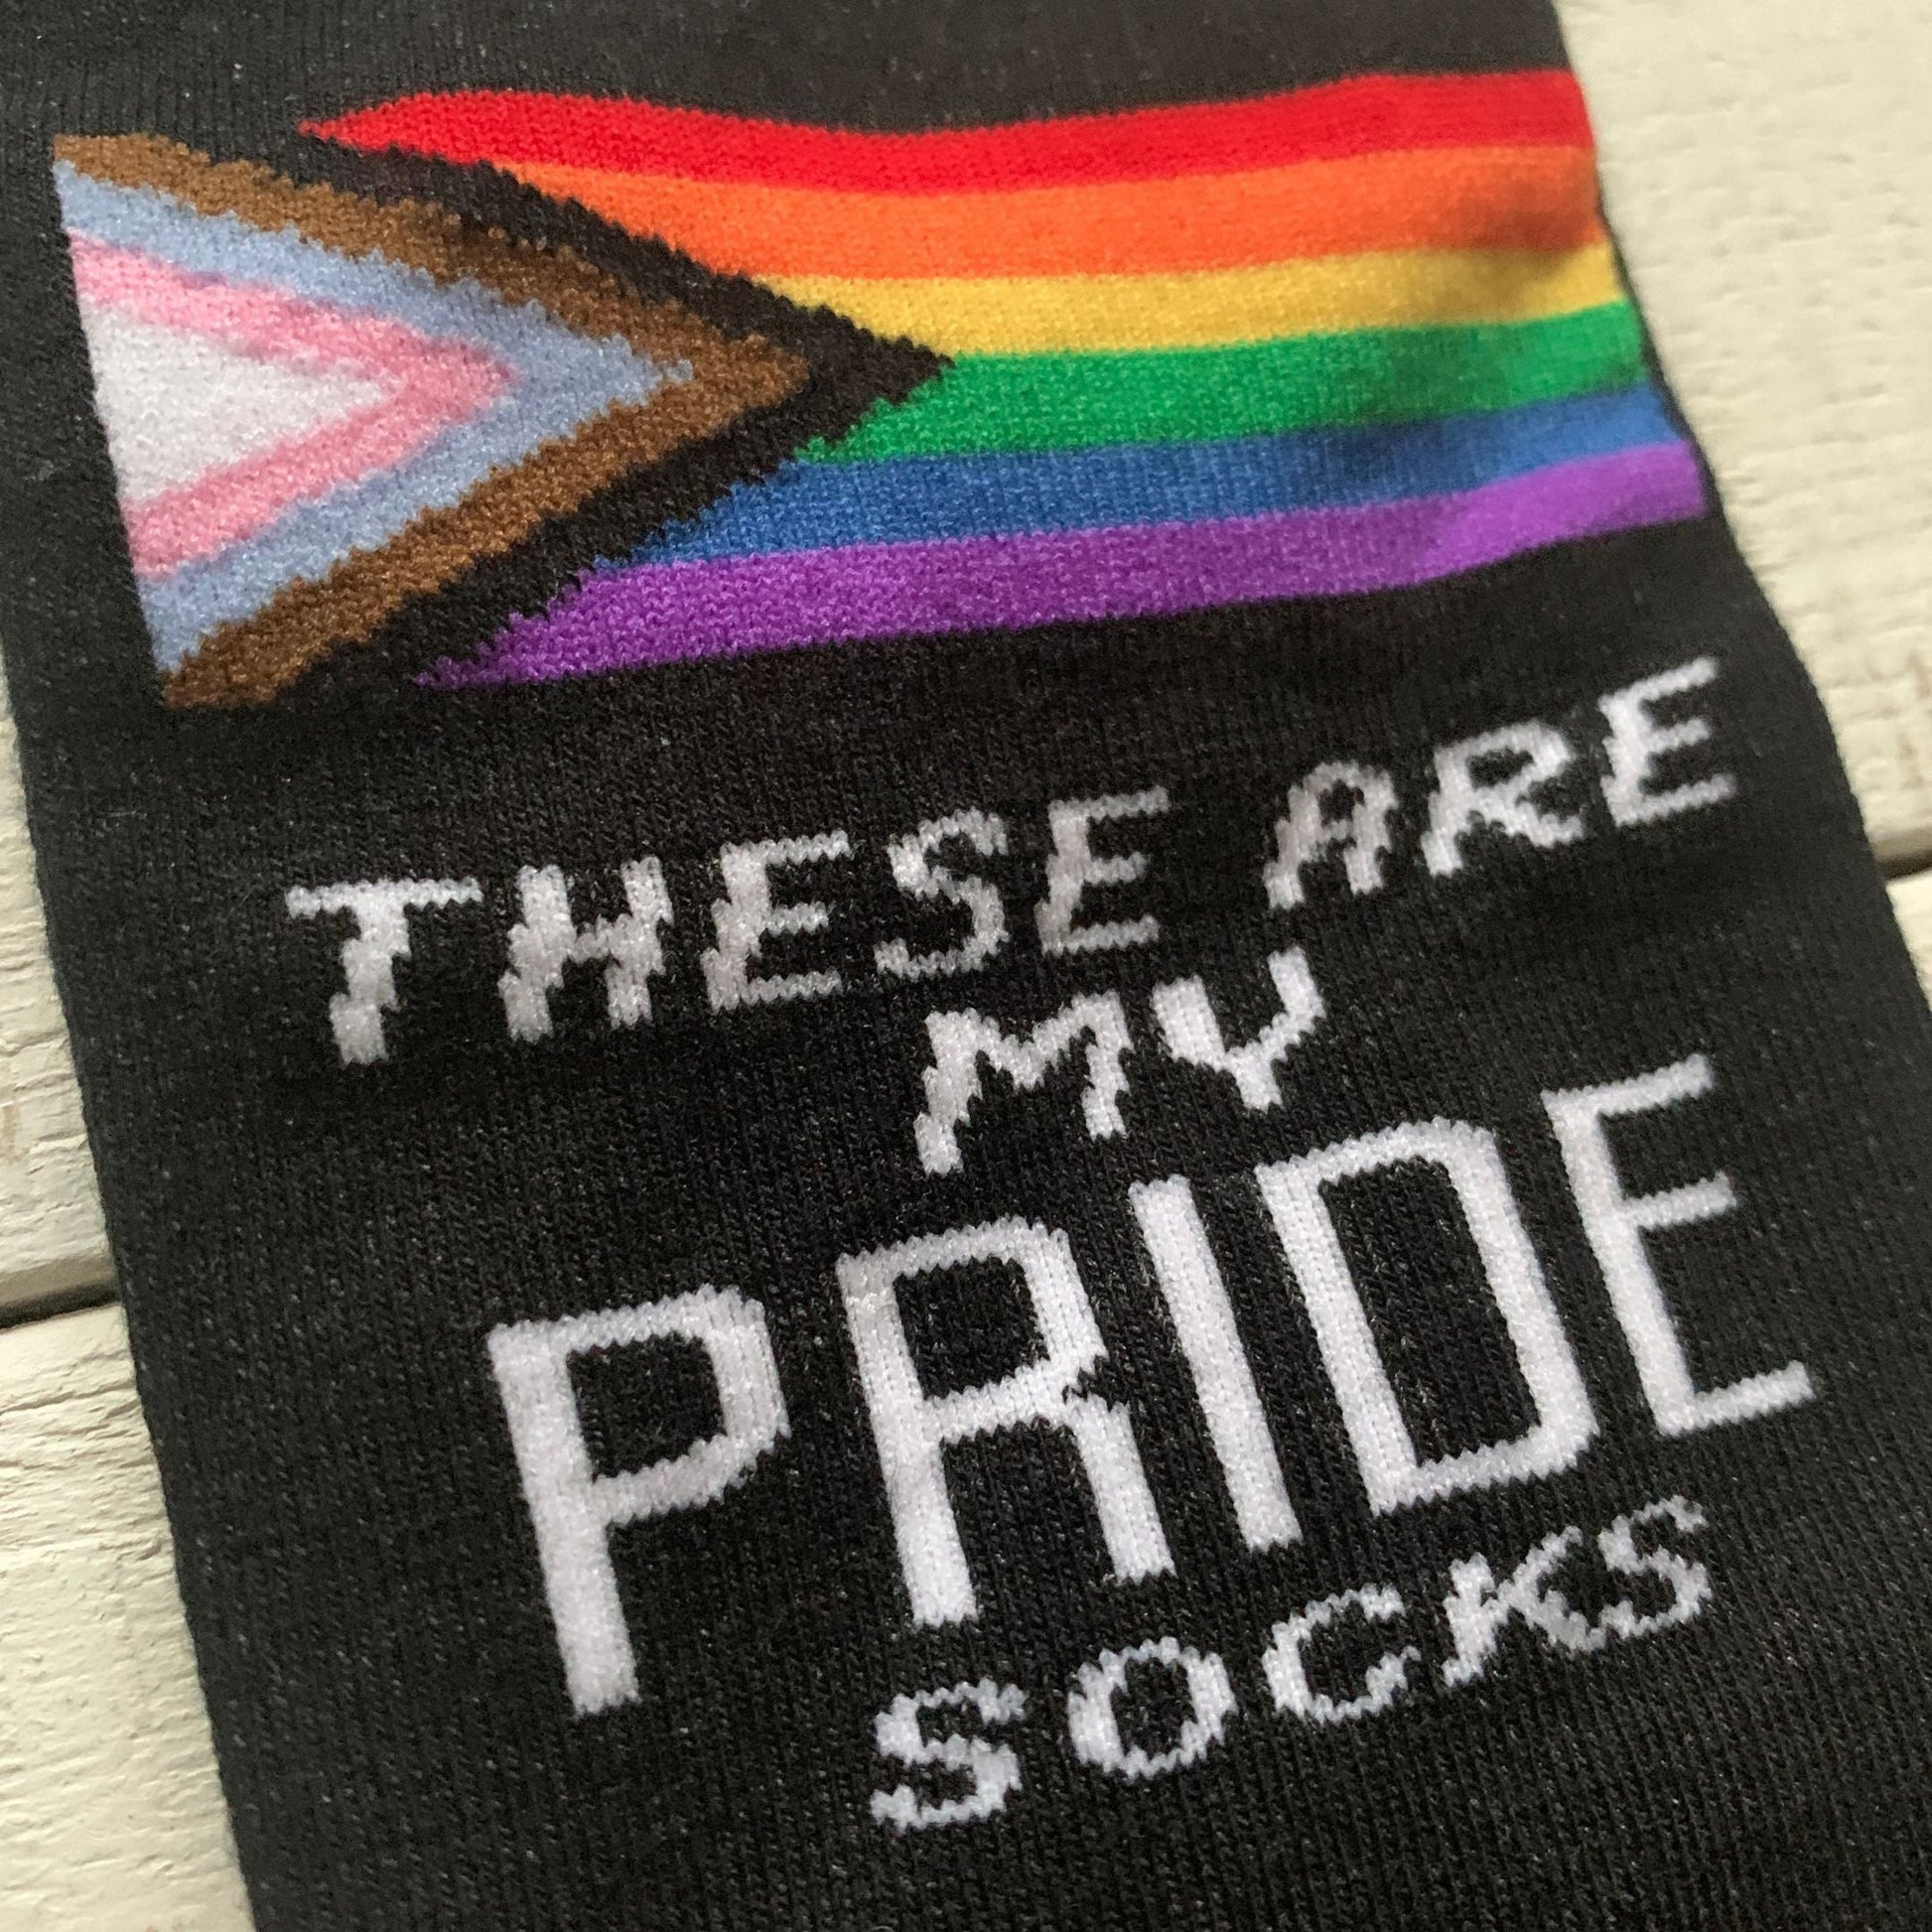 These Are My Pride Socks | Funny Novelty Socks with Cool Design | Bold/Crazy/Unique Dress Socks